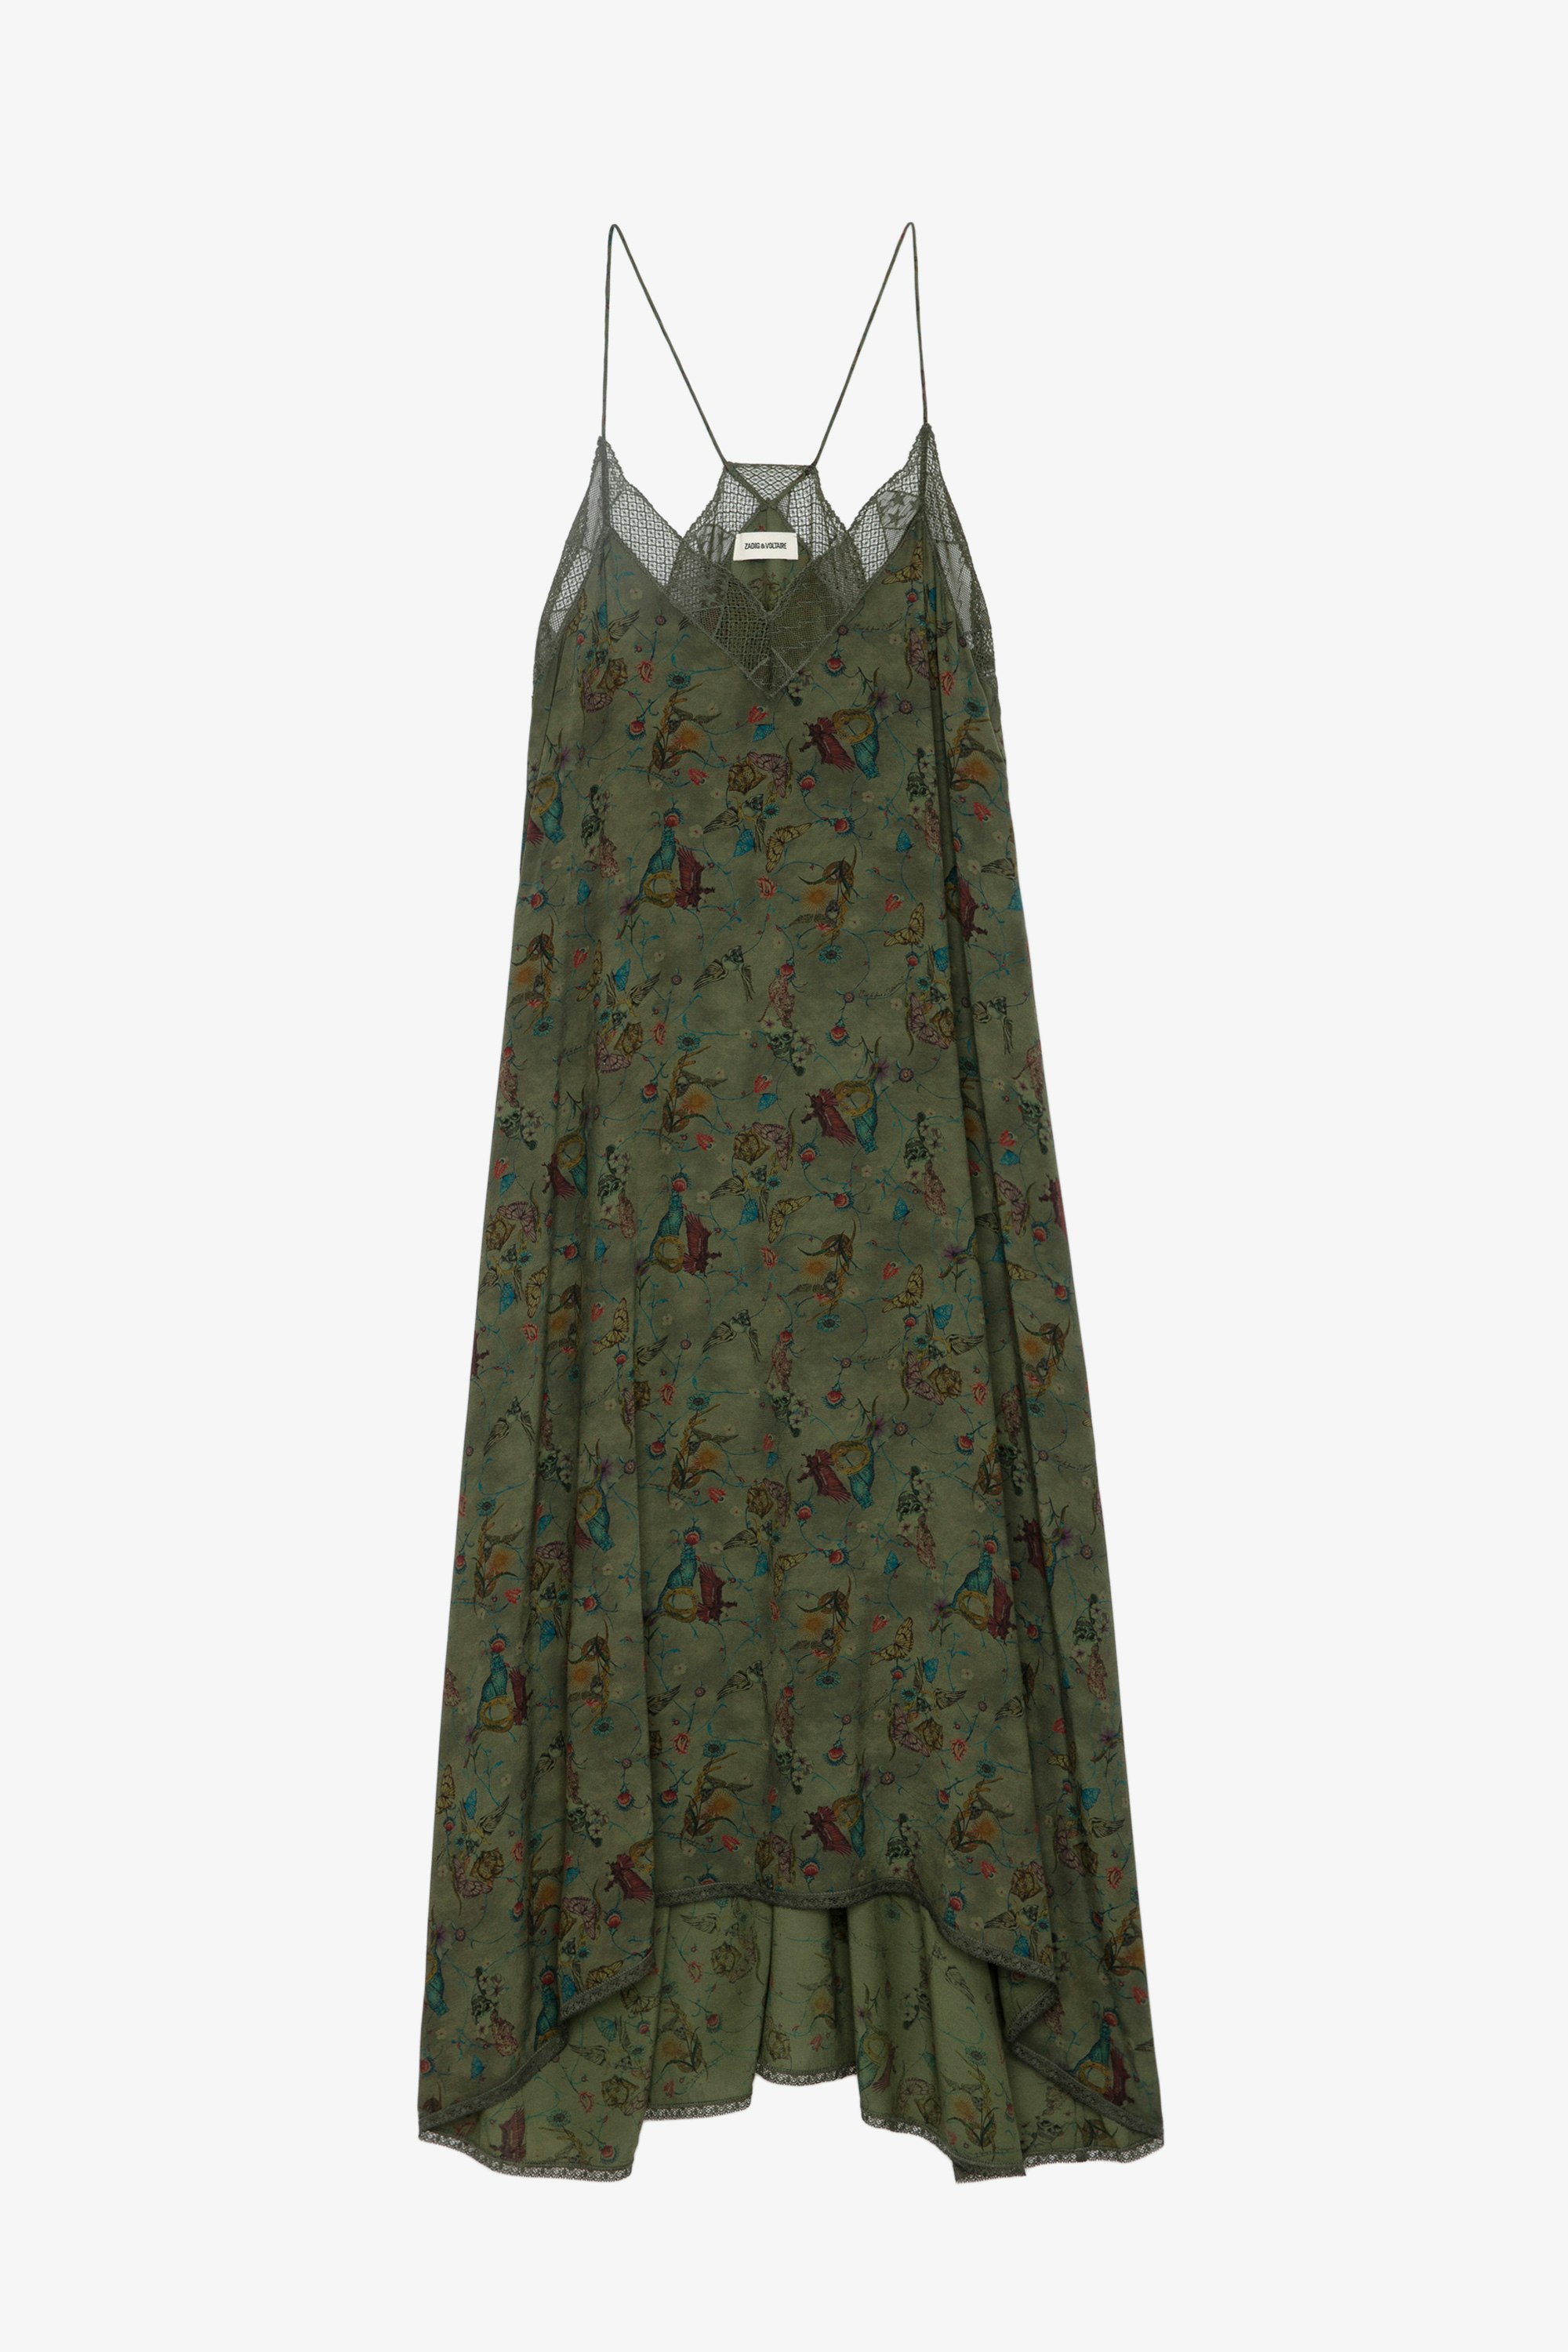 Risty Dress - Printed khaki lingerie-style long dress with thin straps and lace-trimmed neckline.